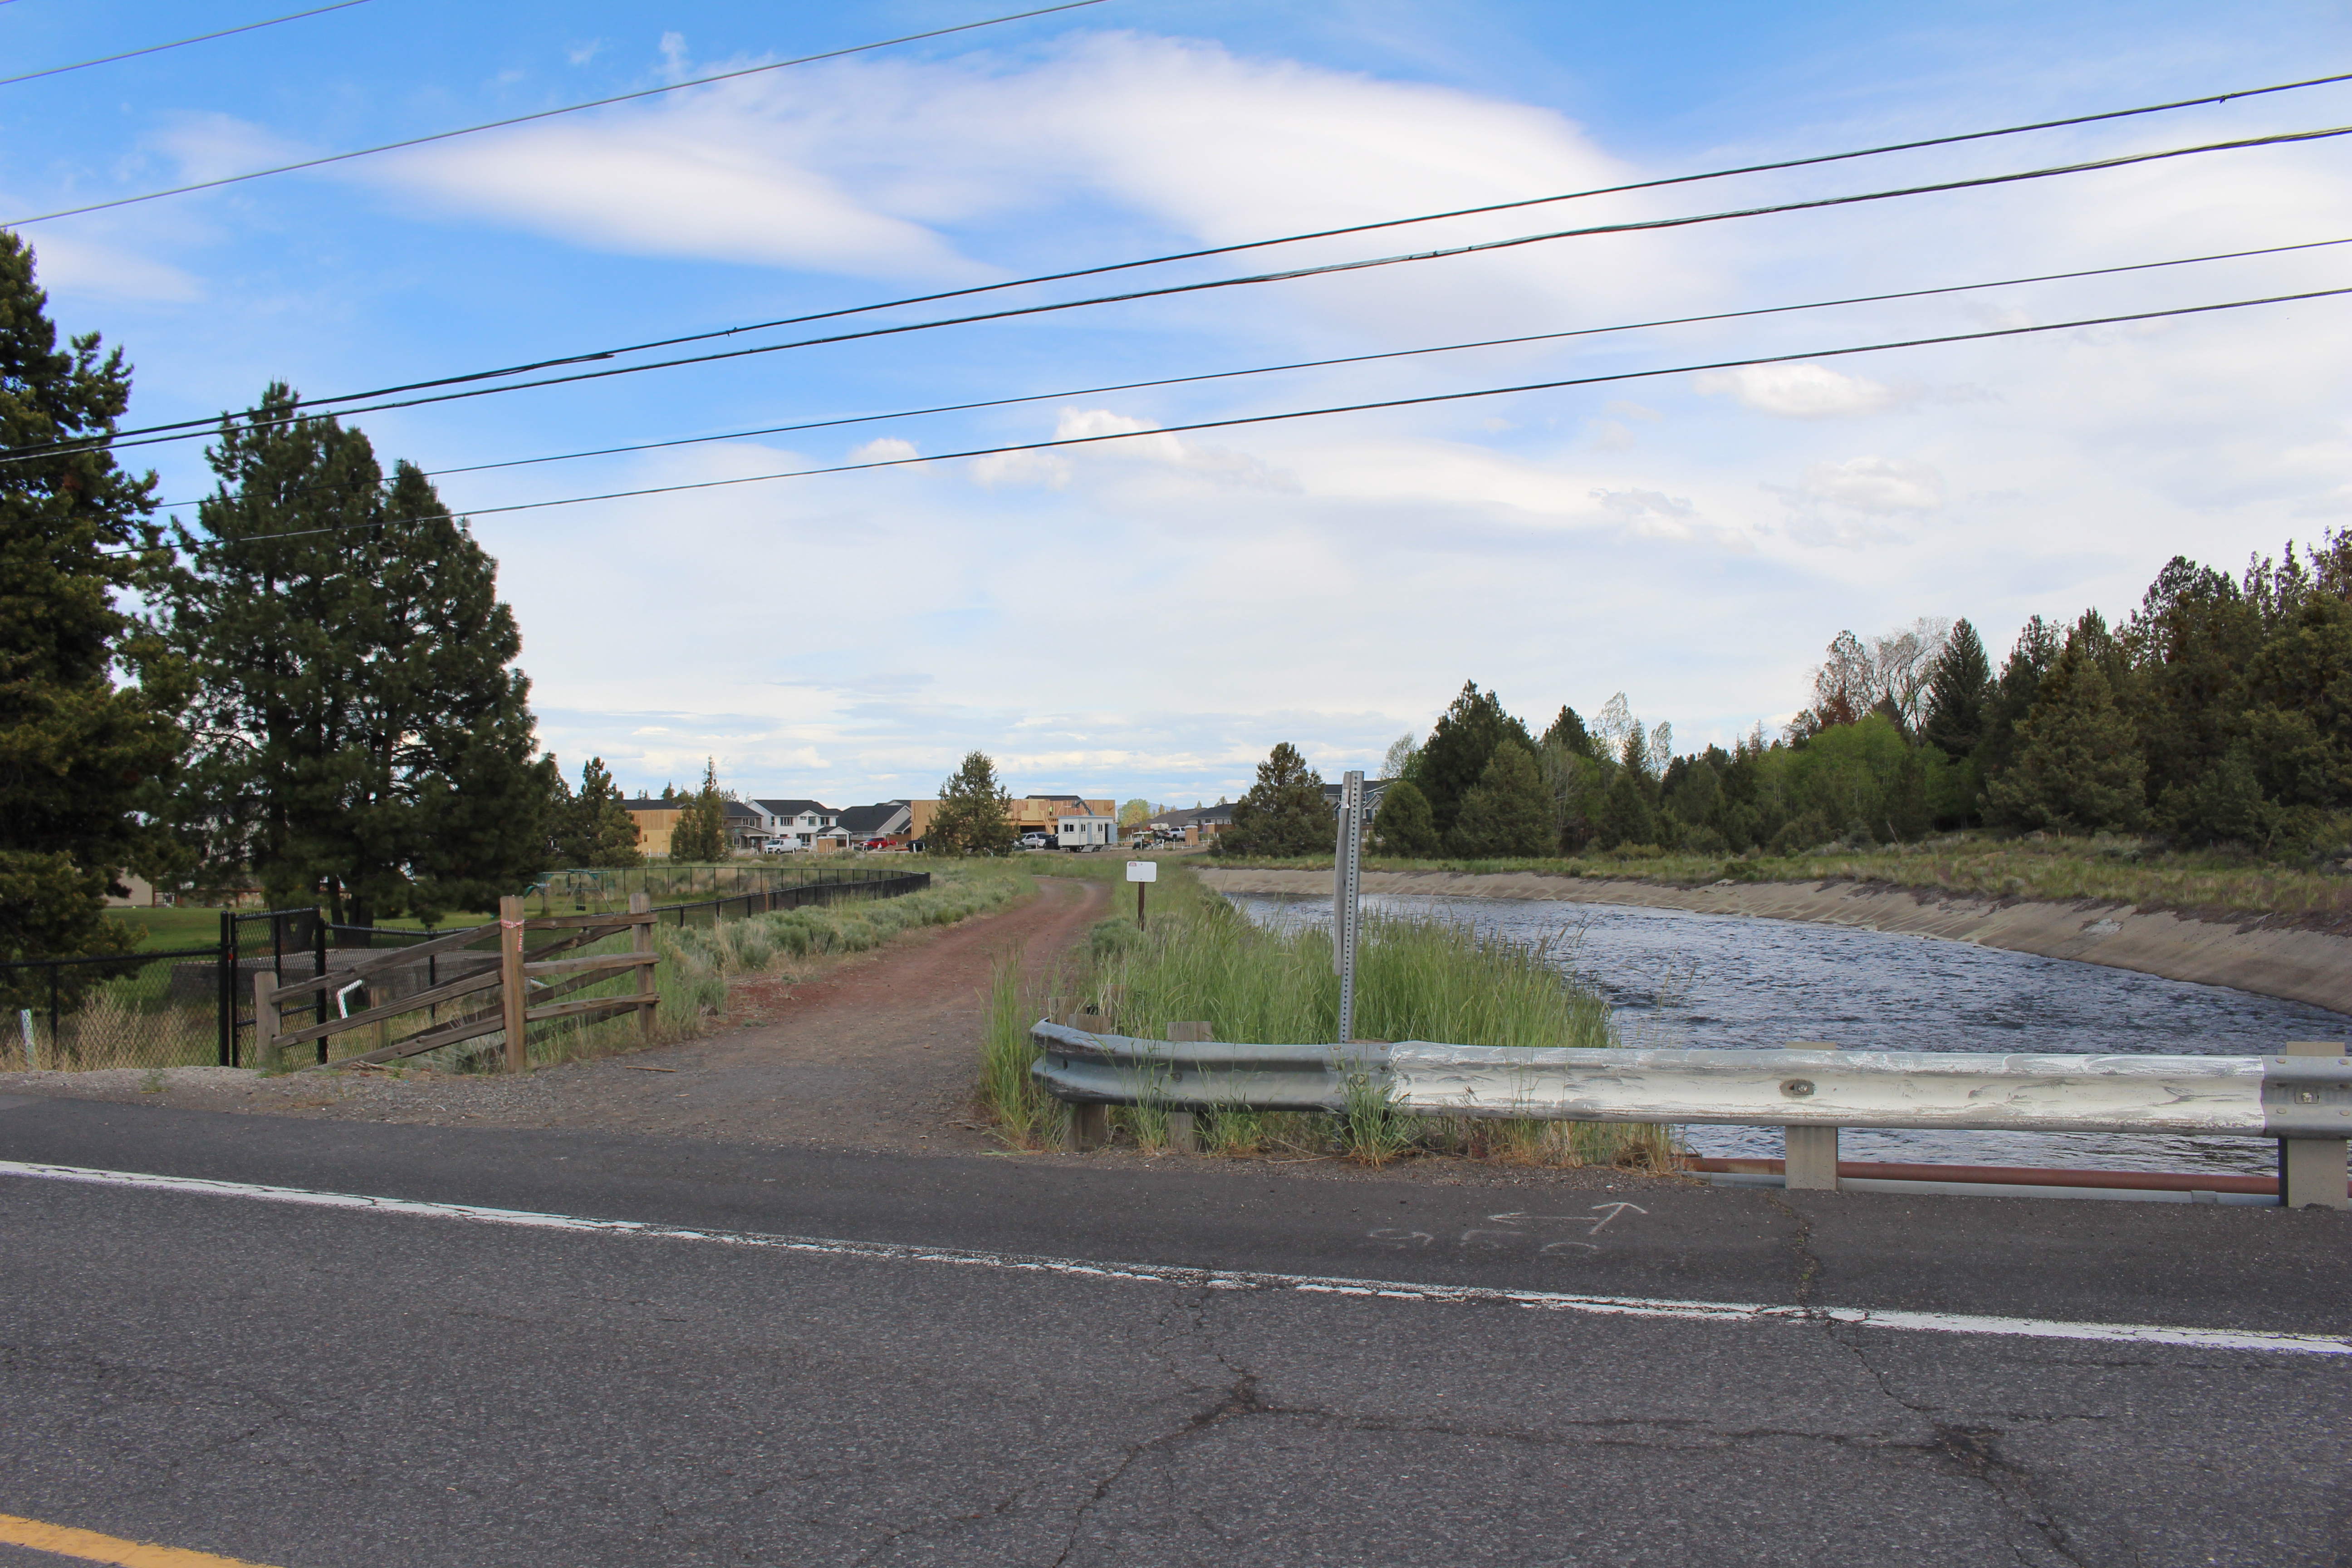 NUID Trail canal view at Deschutes Market